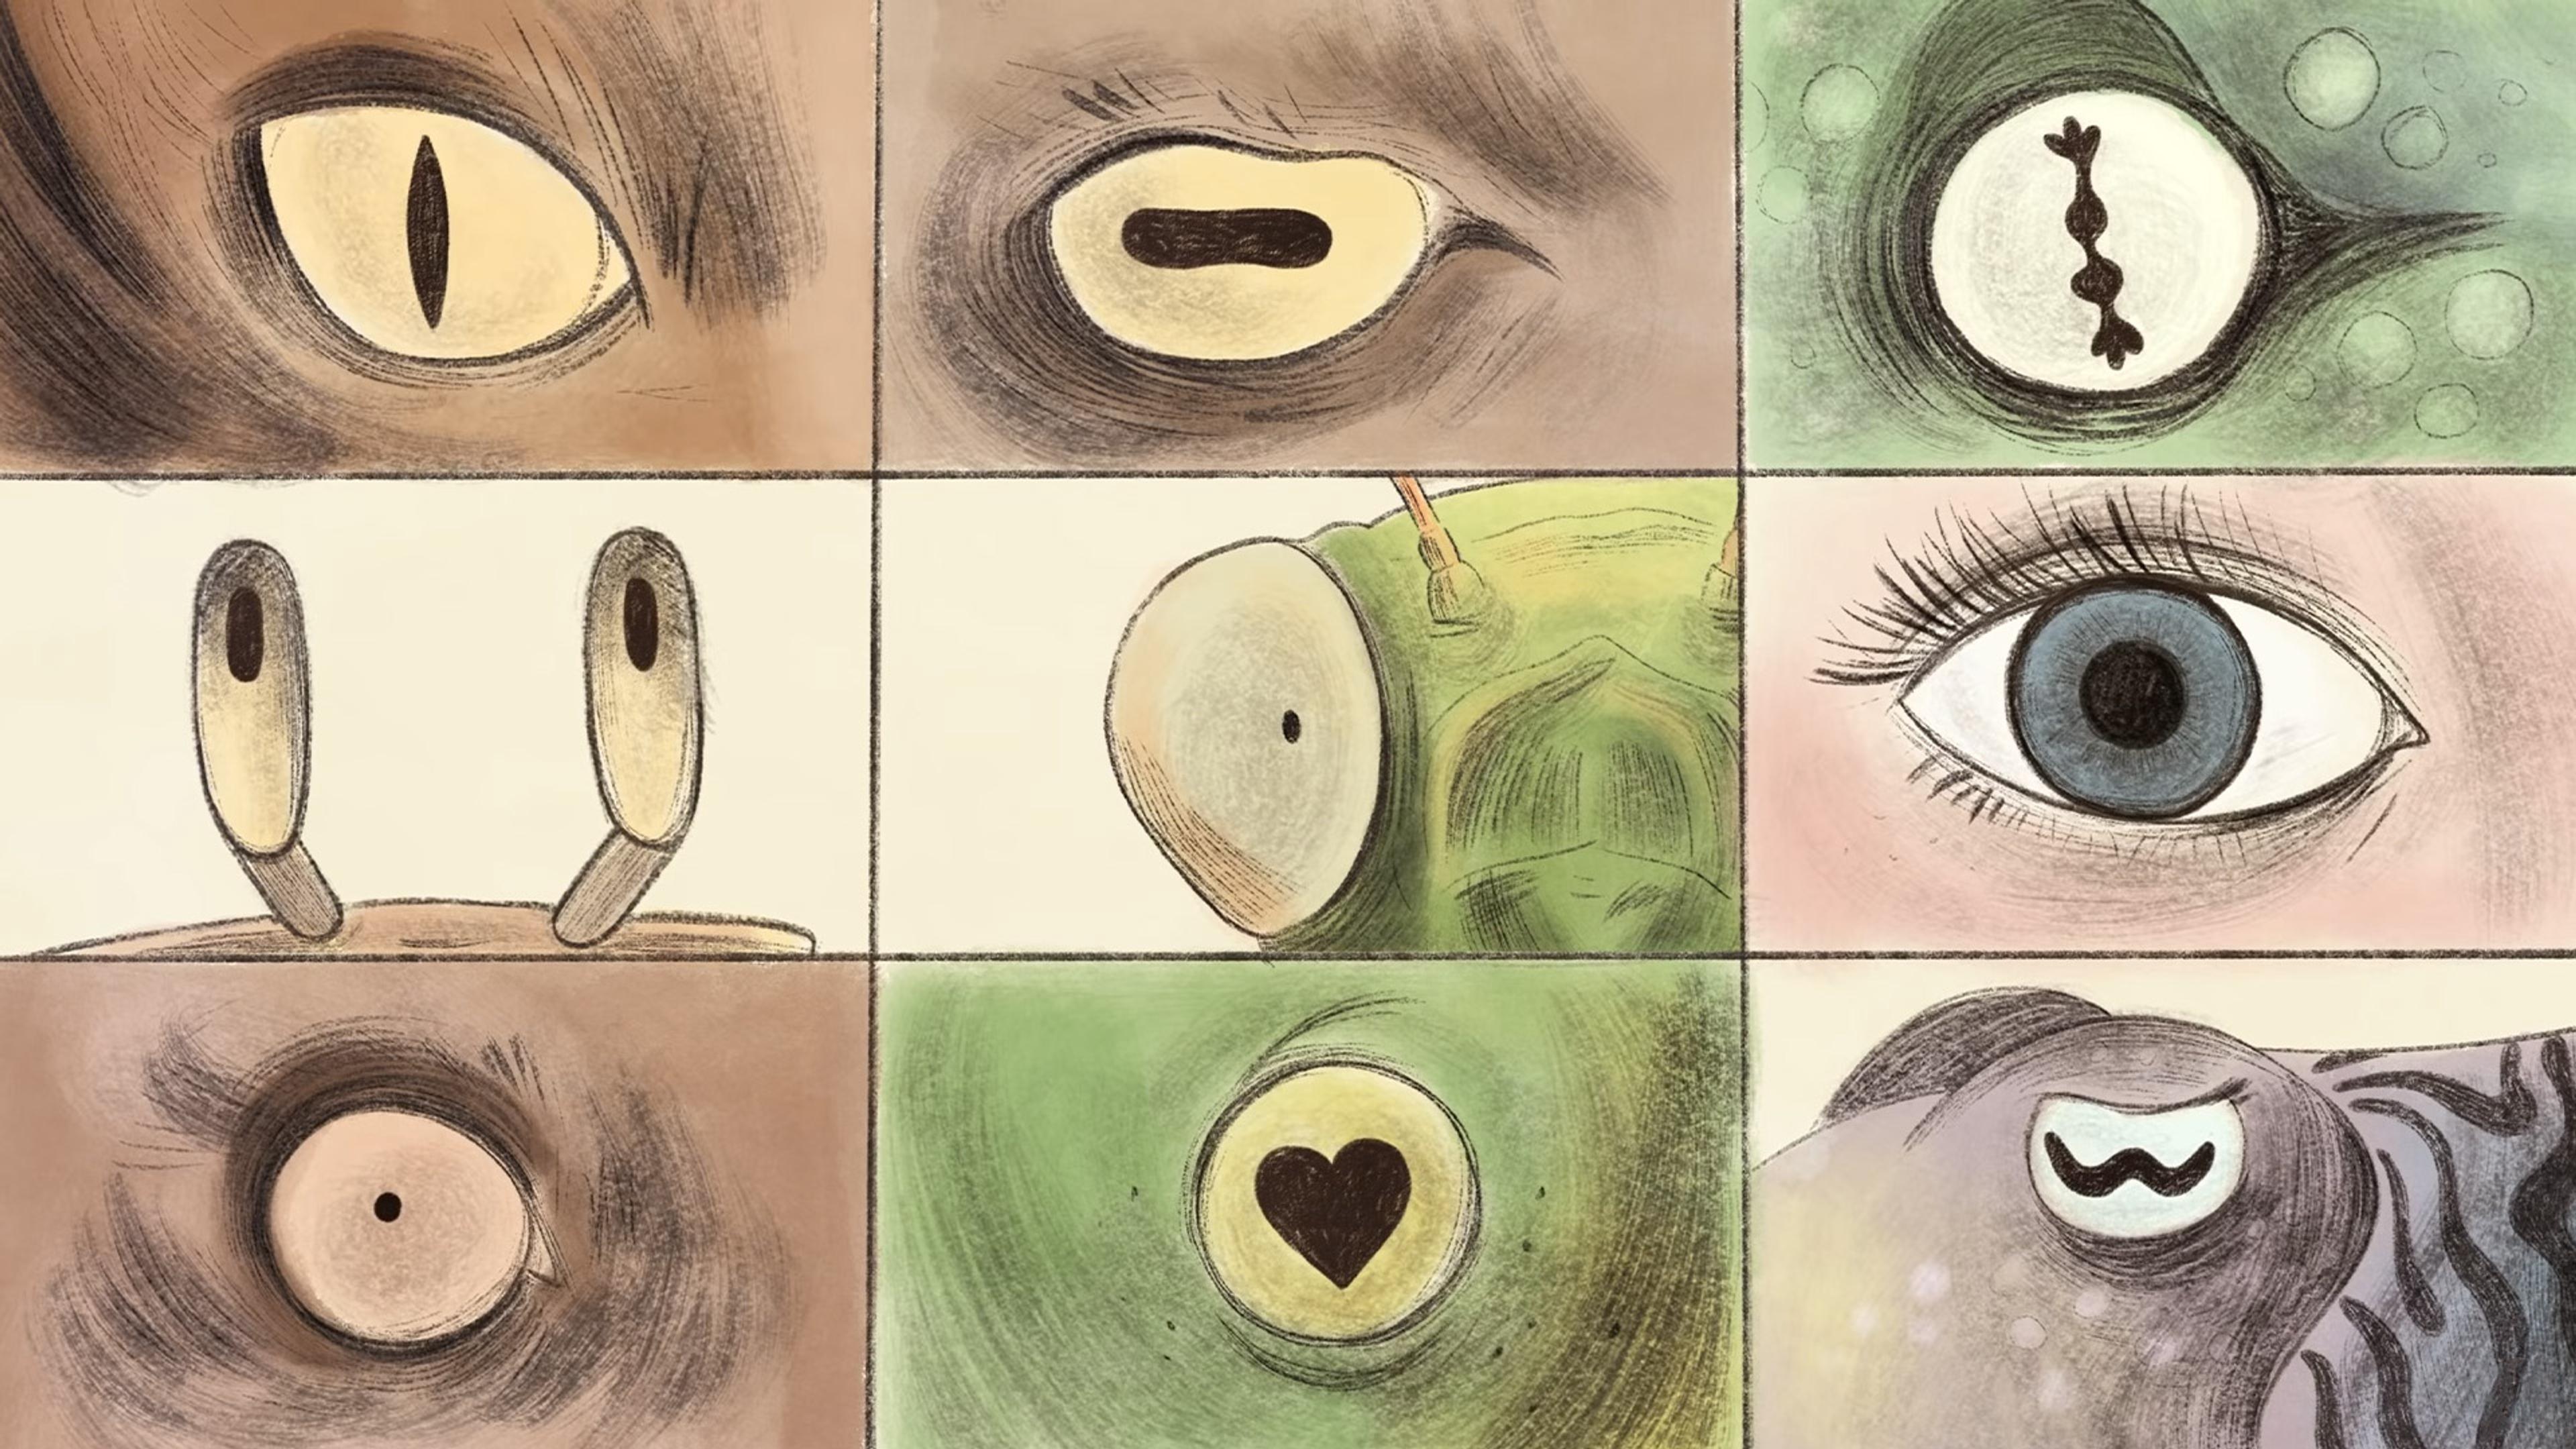 Illustration showing a grid of nine different eyes, each uniquely stylised, depicting a variety of creatures, including a human eye with blue iris.